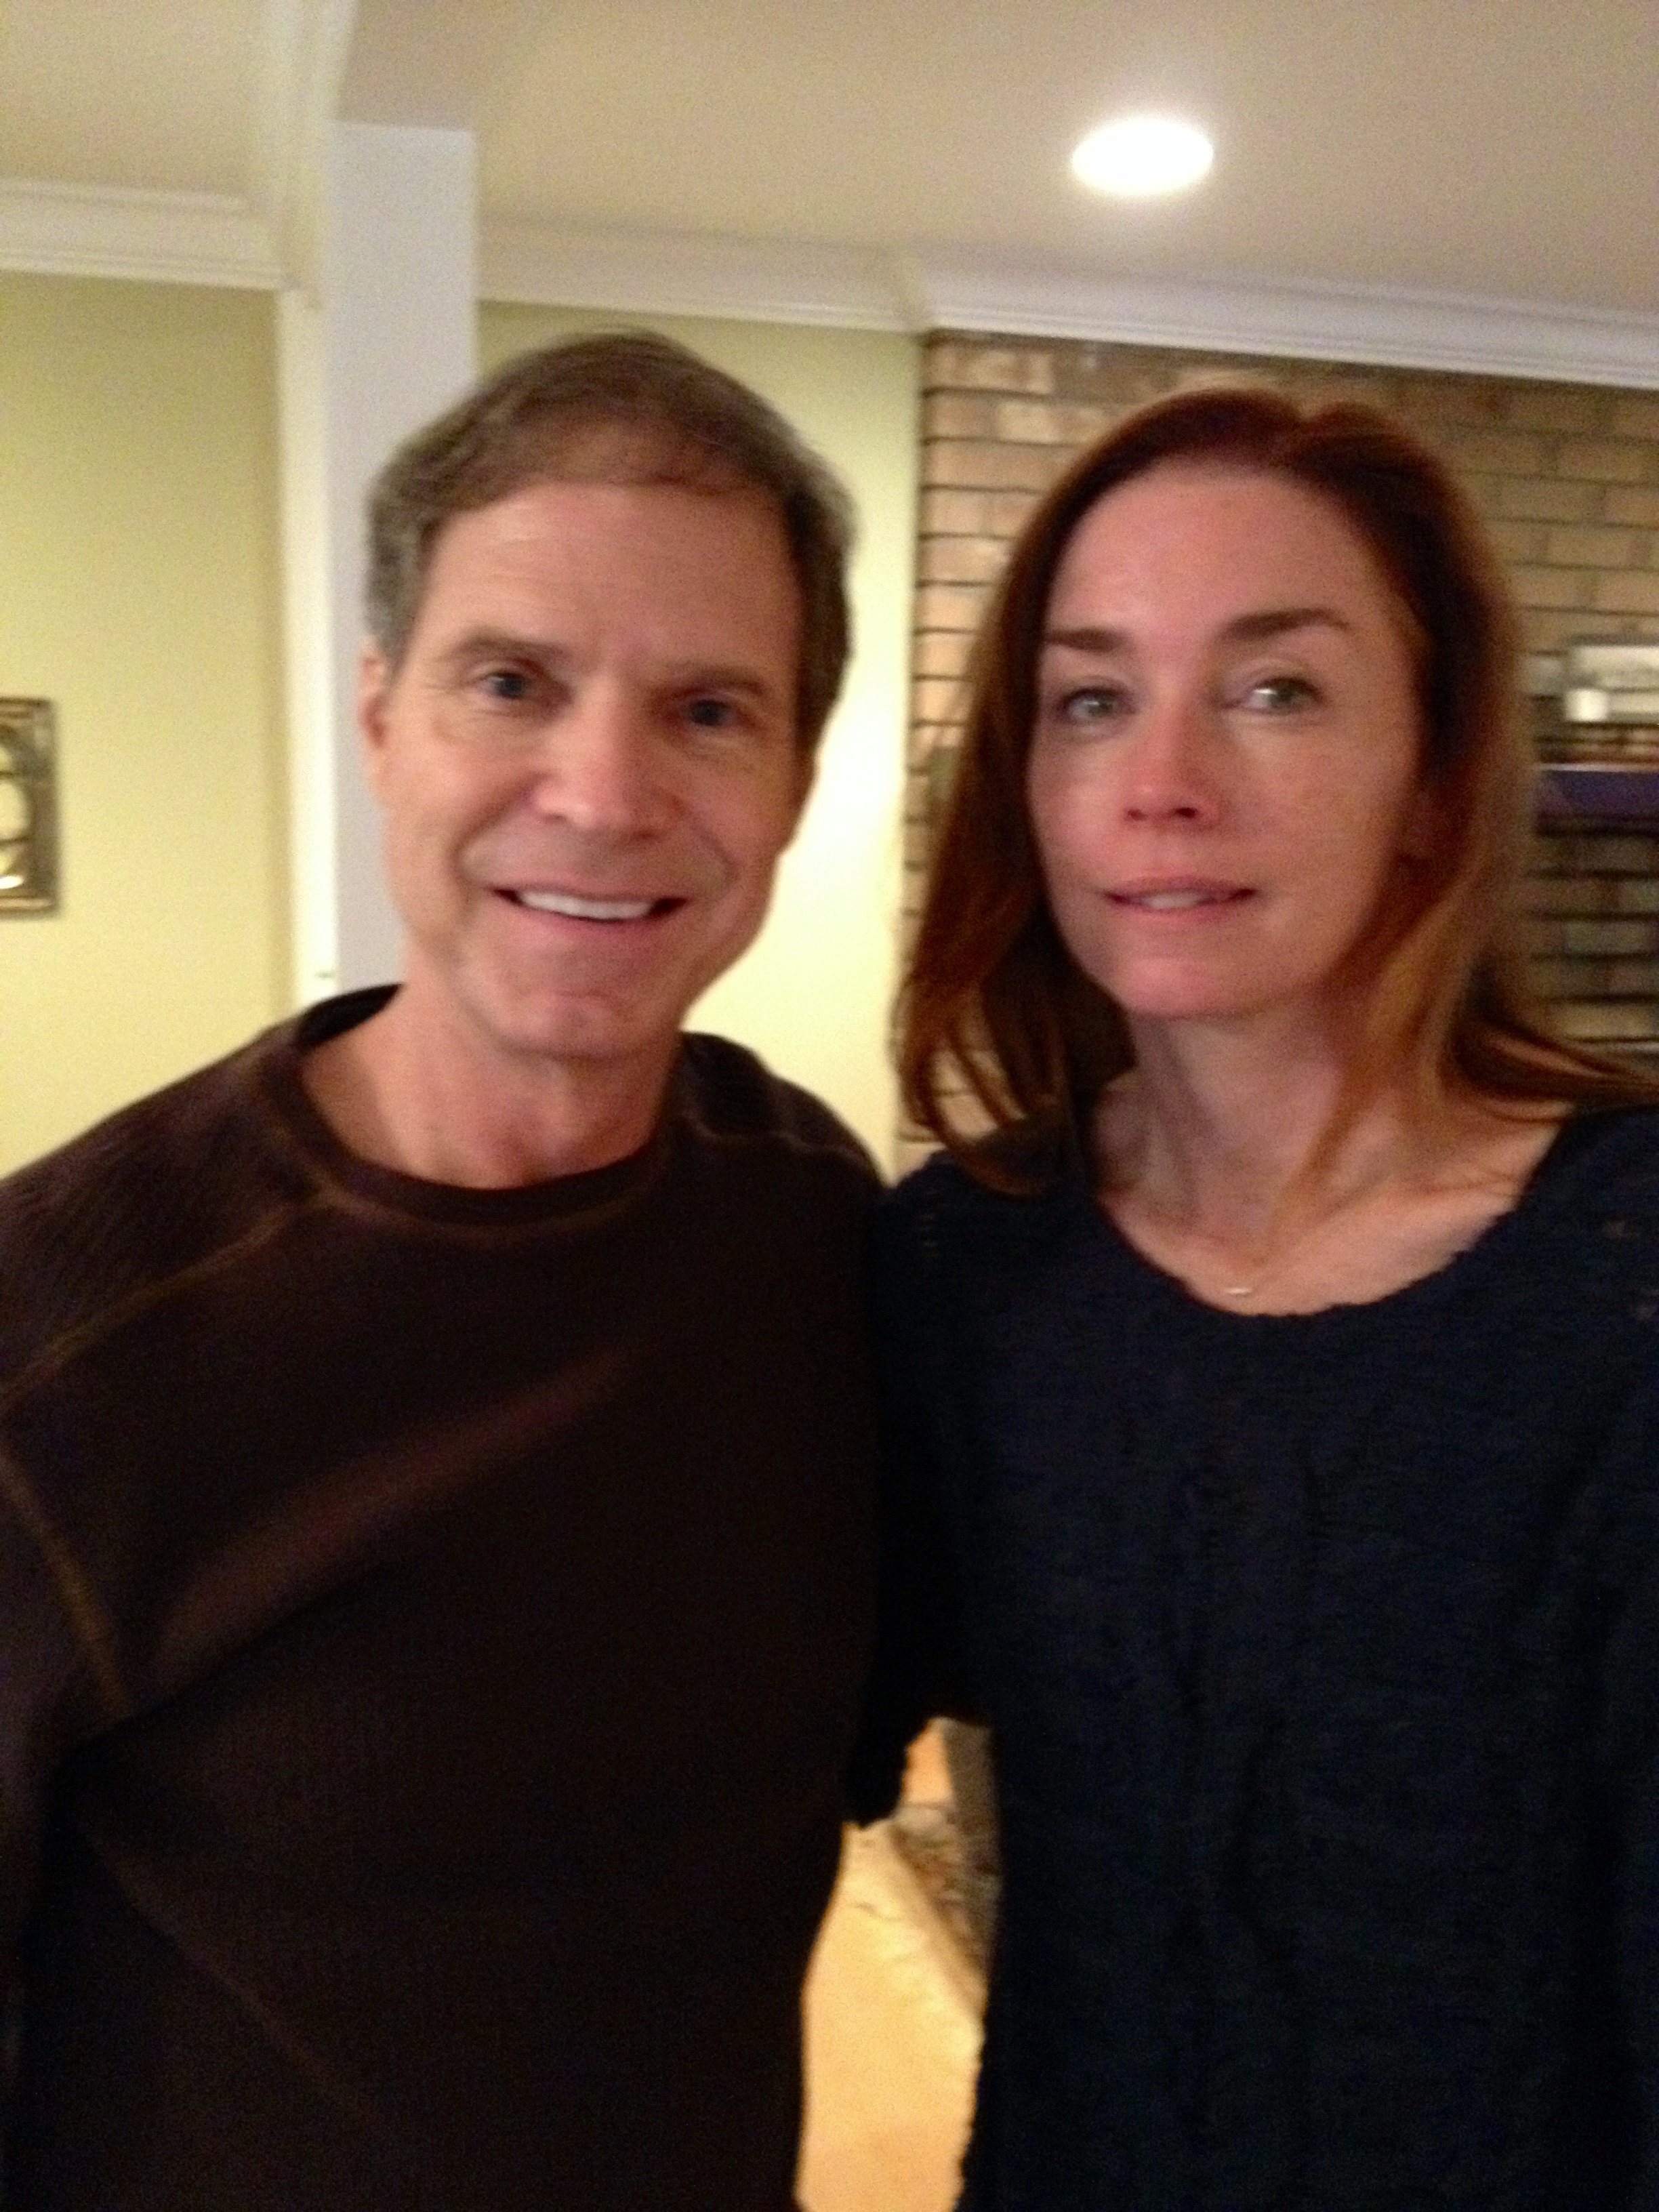 Julianne Nicholson and Randall Taylor in 